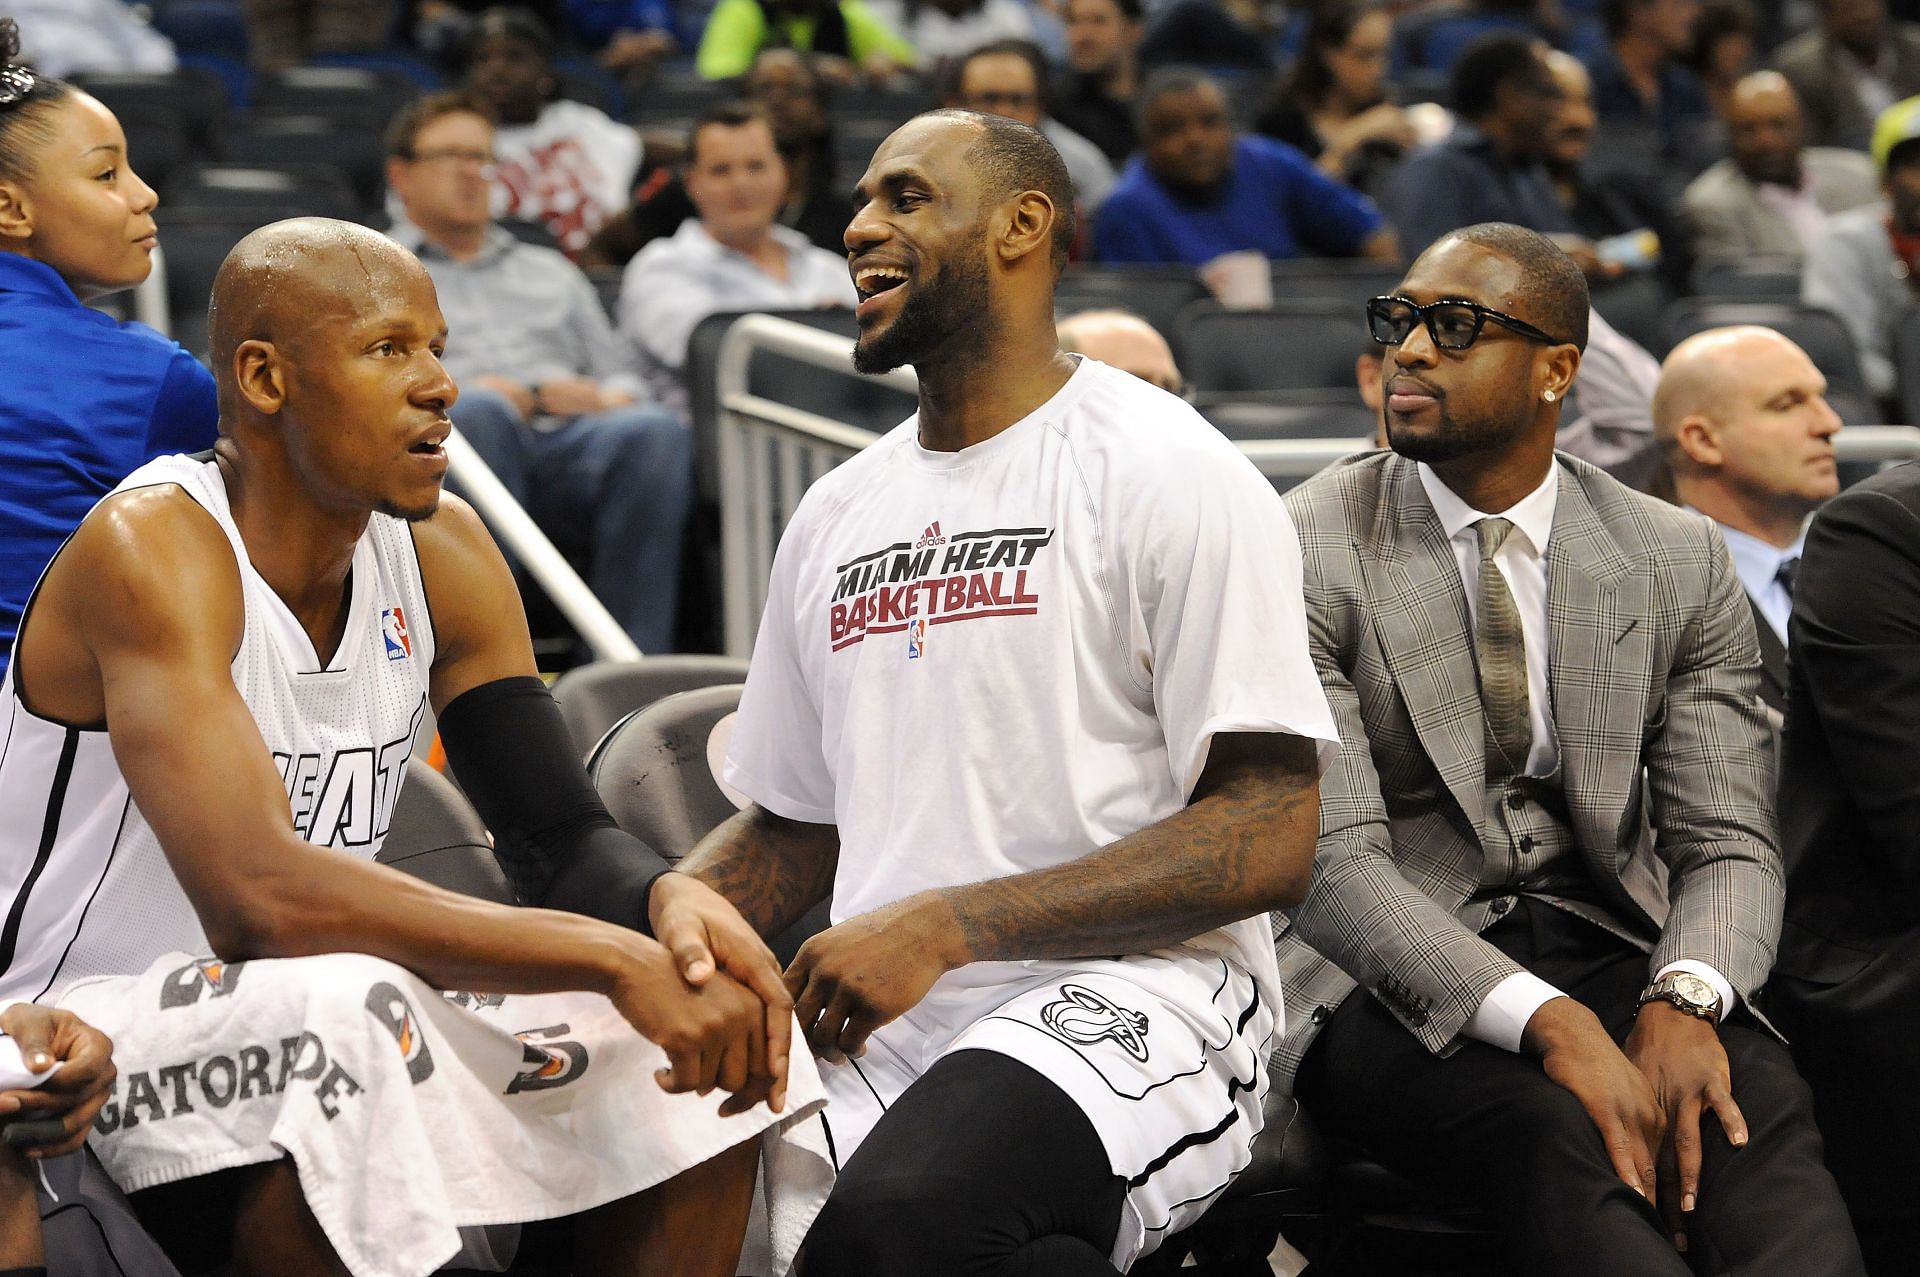 Ray Allen, LeBron James and Dwyane Wade watch on from the sidelines during the Miami Heat v Orlando Magic game